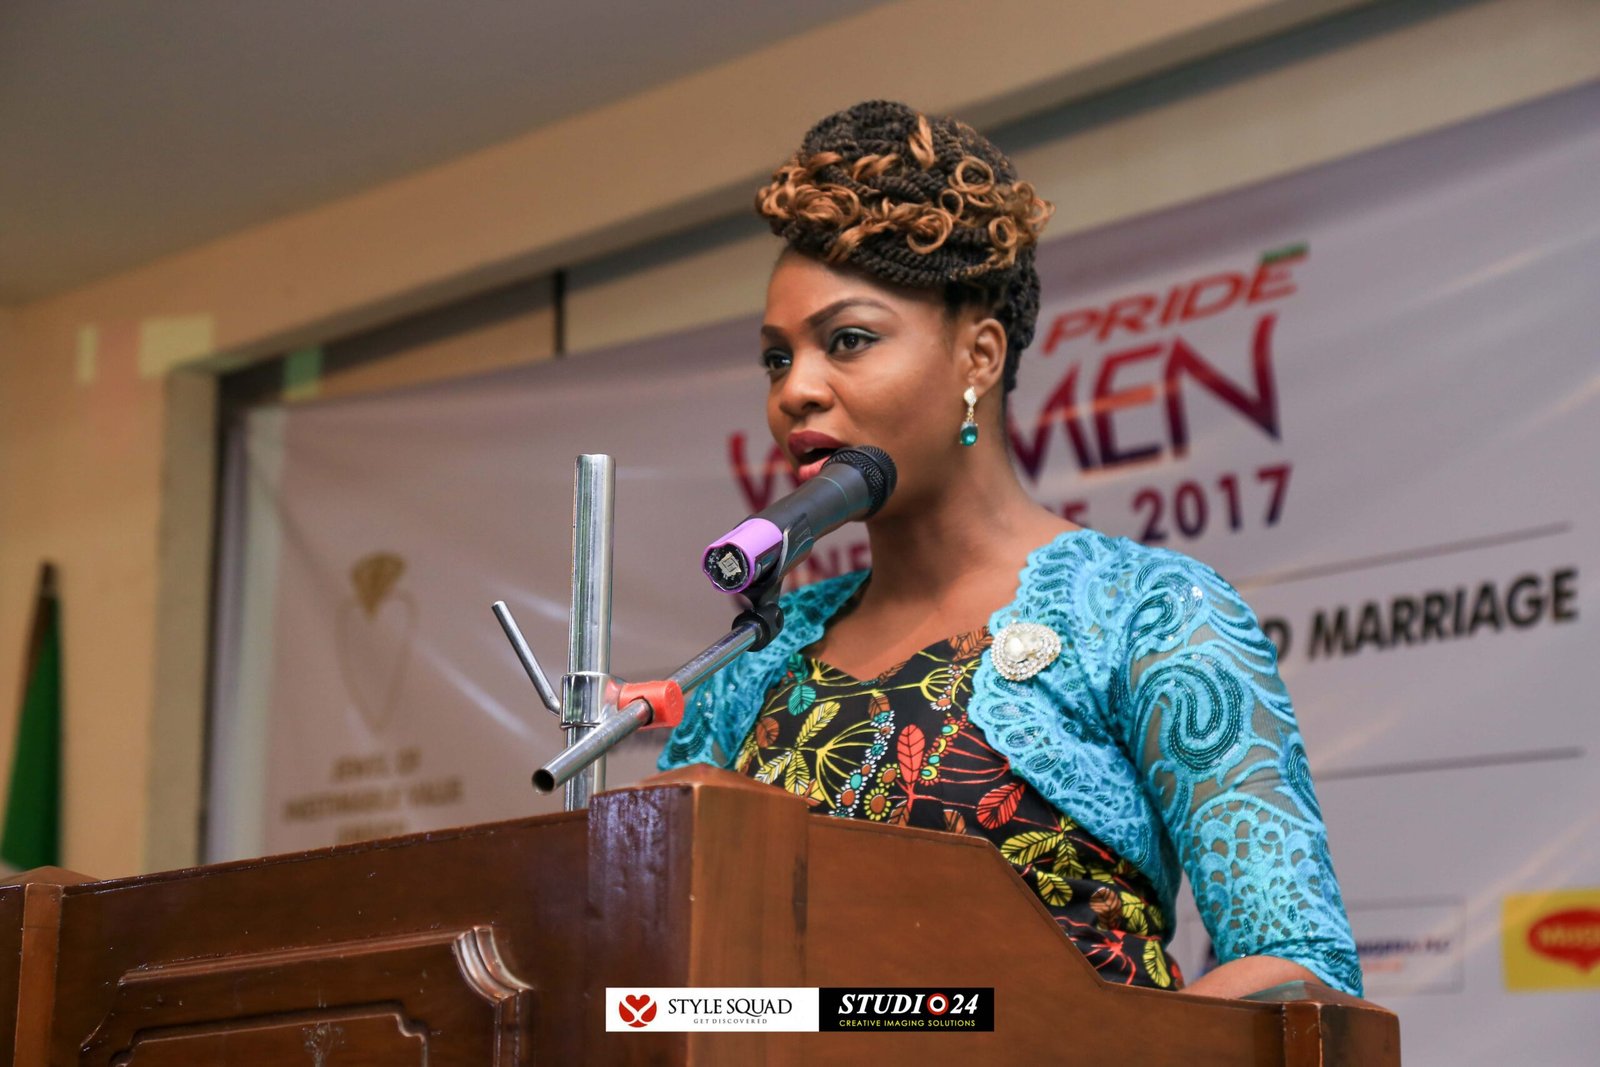 Pride Women Conference 2017 work women and marriage in the 21st century, Barrister Nneka Ezeani, building a female brand, female empowerment and development in Nigeria, SDGs goal 5, sound mental health and well being among women in Nigeria,